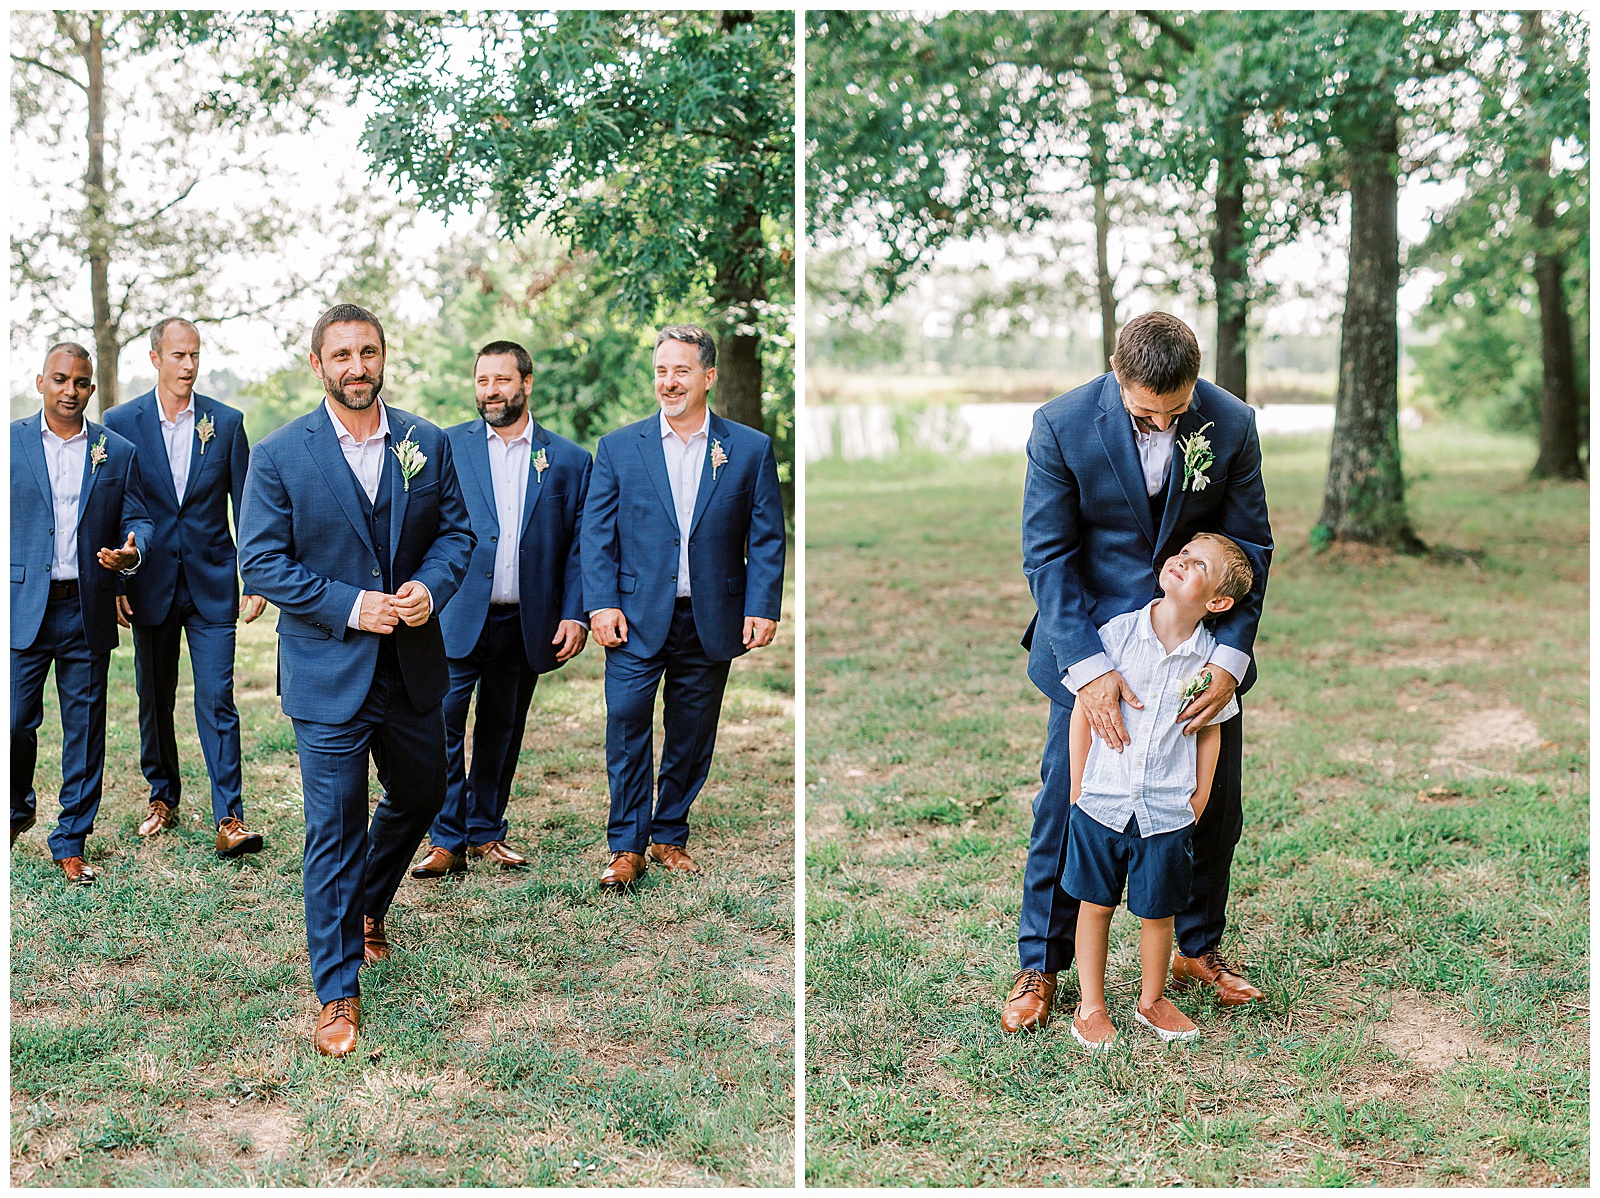 groomsmen group portrait in navy blue suits with silly son of groom